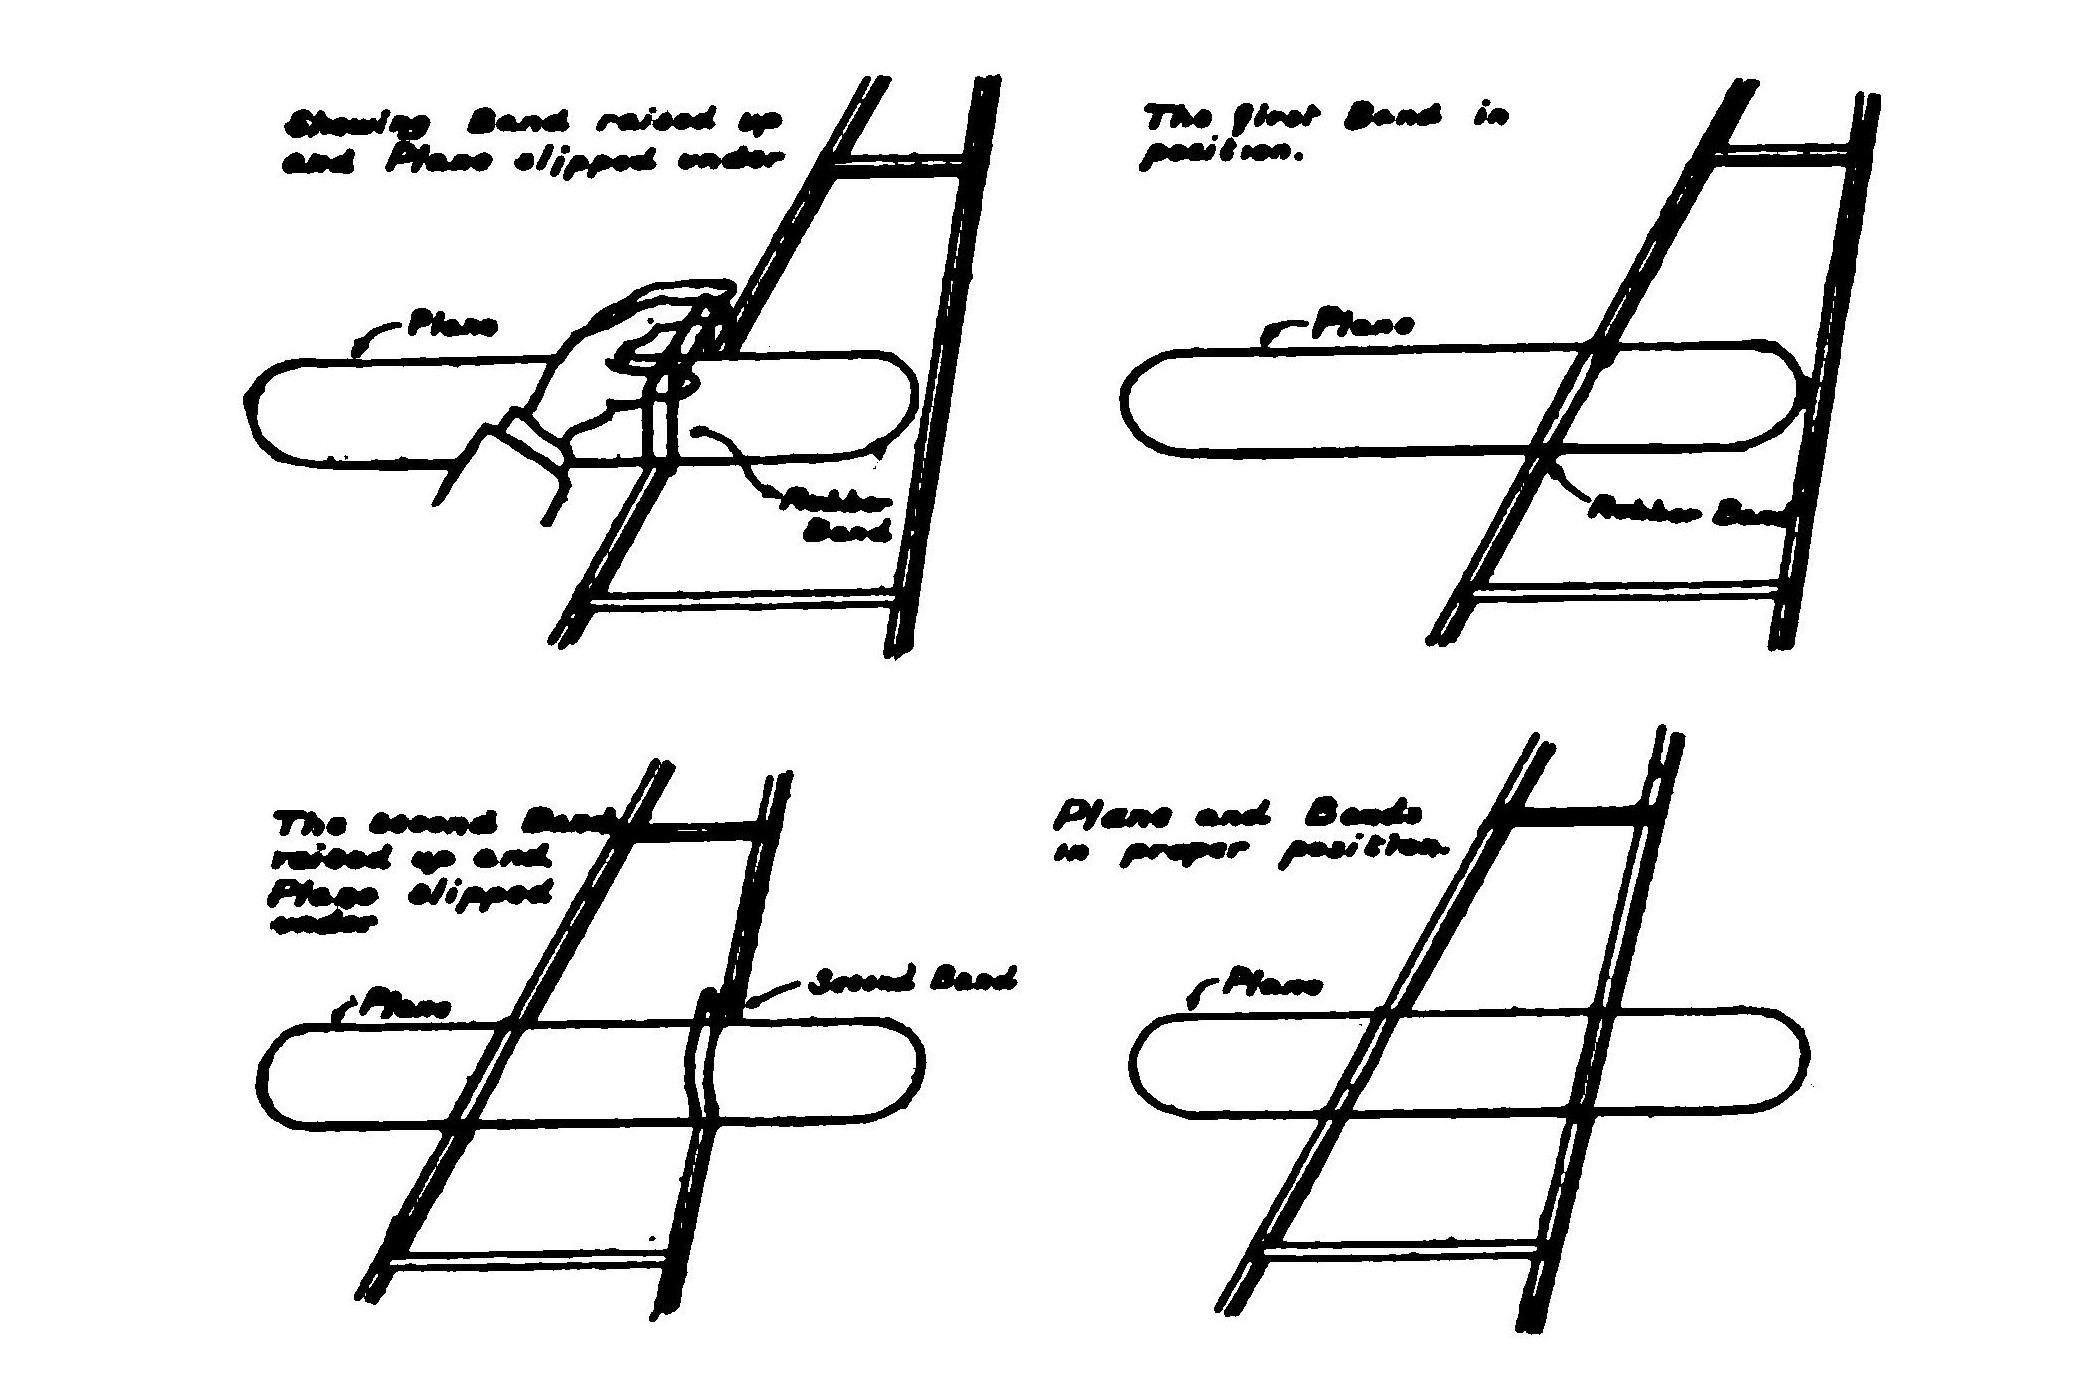 FIG. 53. Method of holding plane to frame with rubber bands.